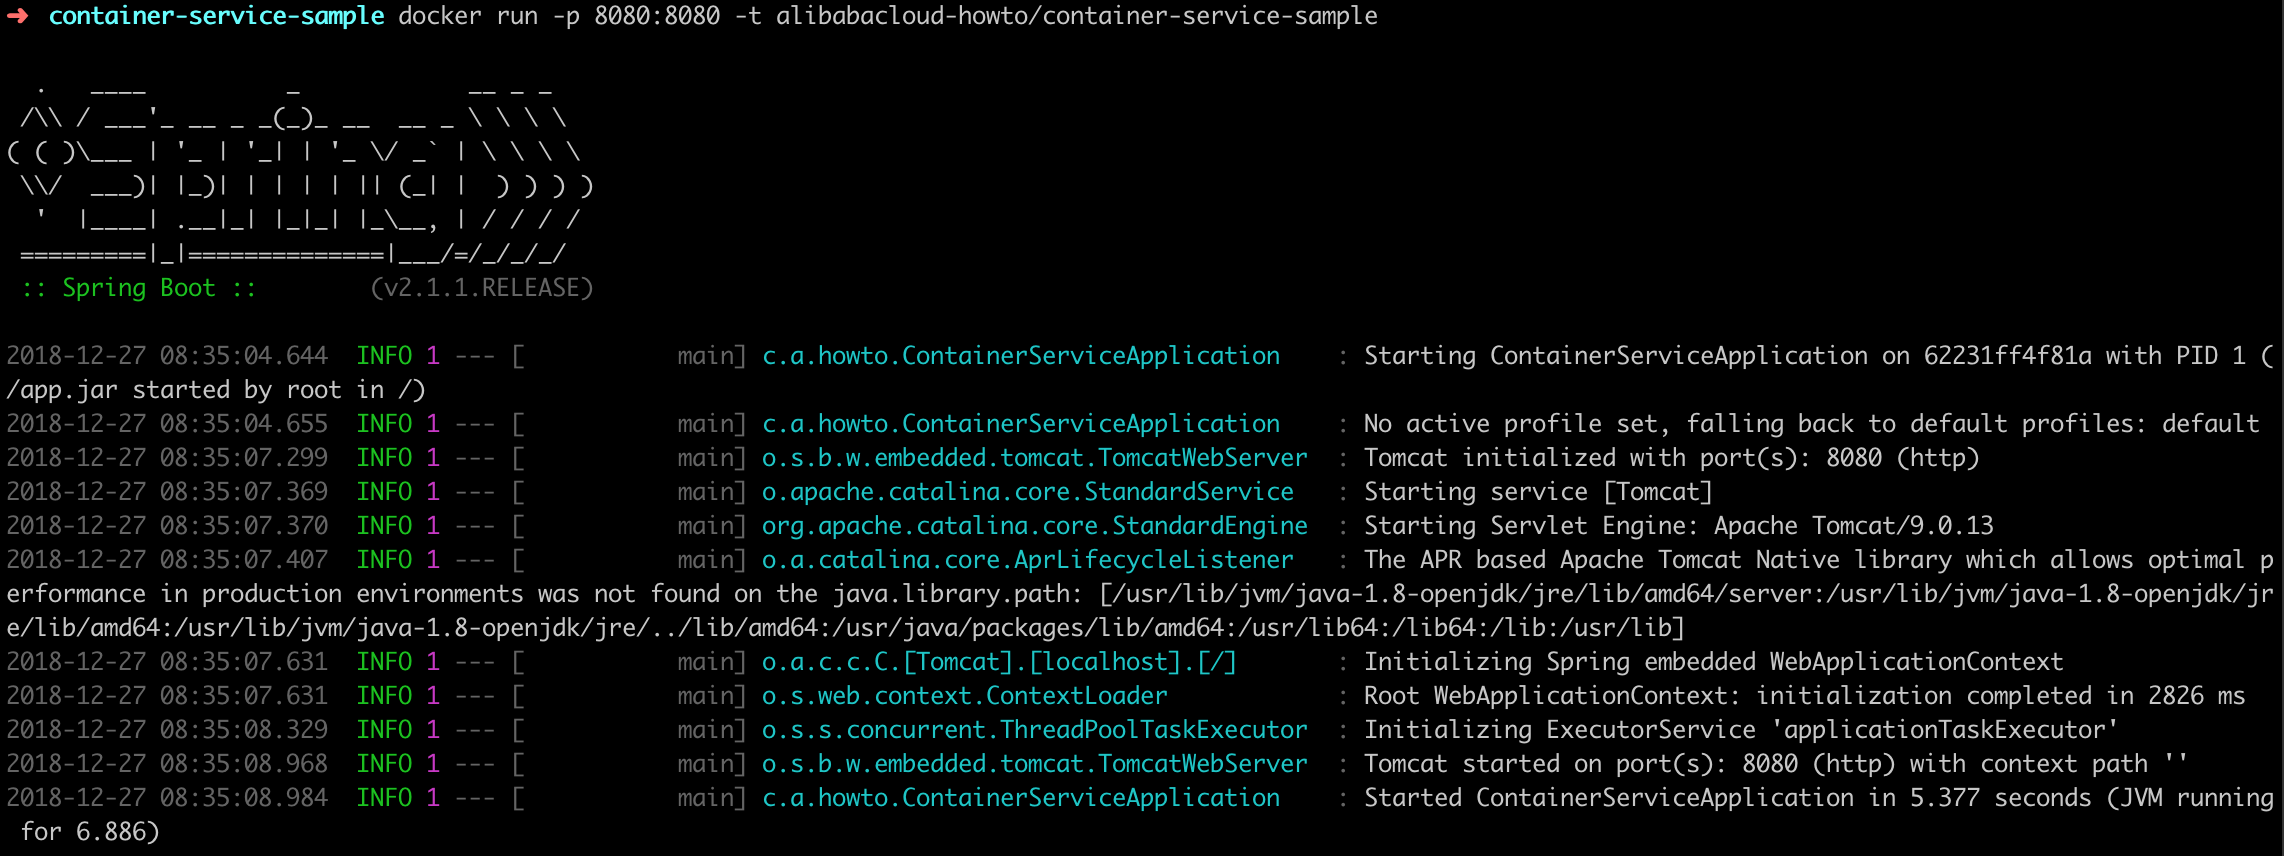 container-service-sample docker image run result